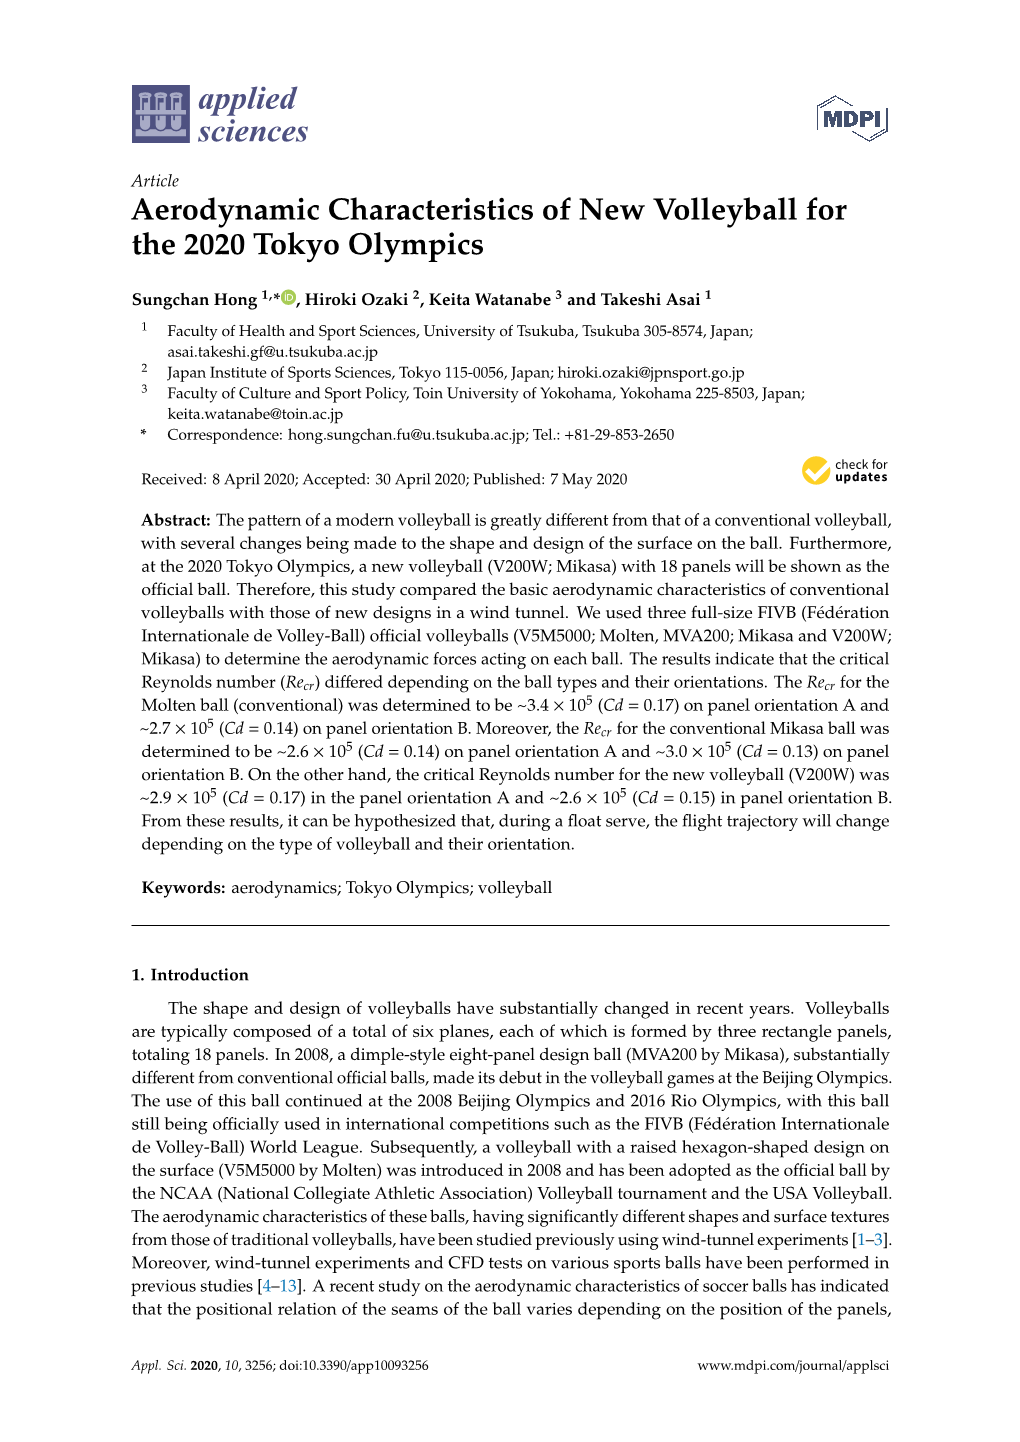 Aerodynamic Characteristics of New Volleyball for the 2020 Tokyo Olympics